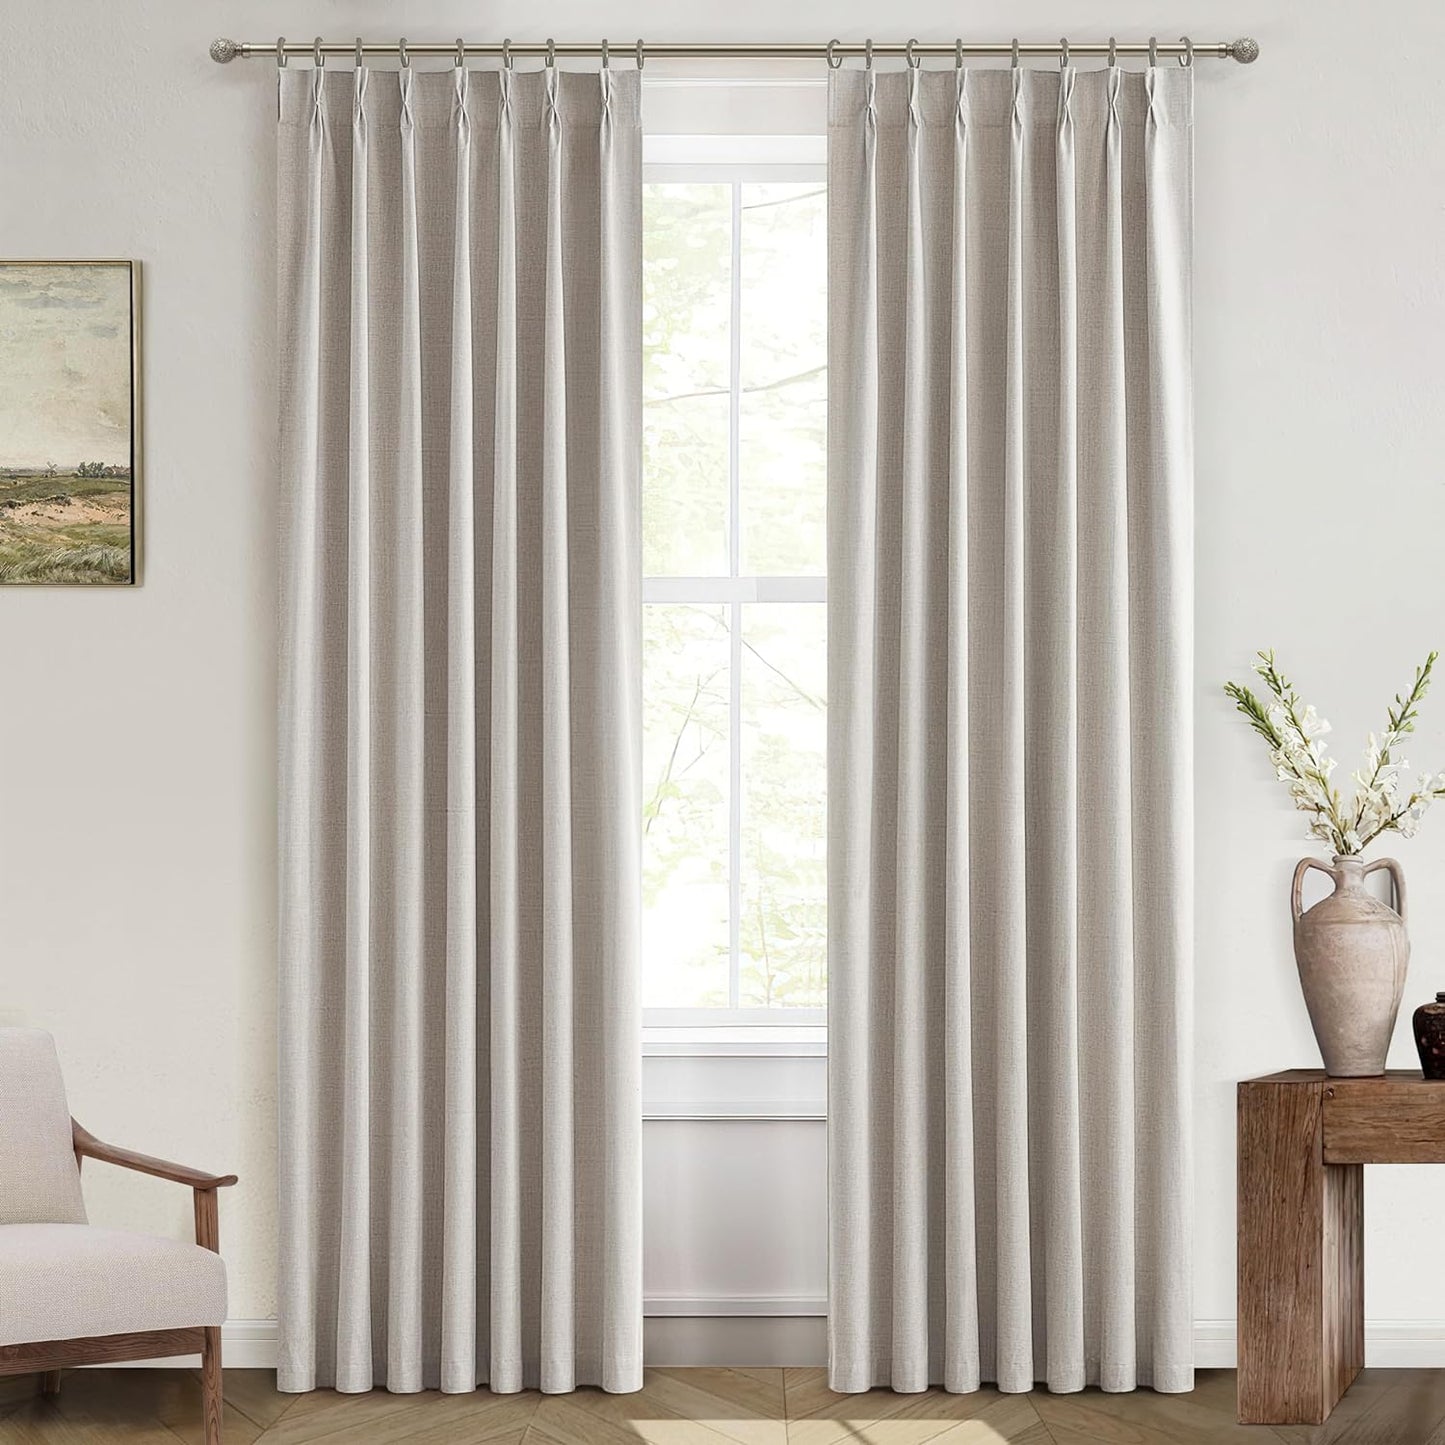 Natural Linen Pinch Pleated Blackout Curtains & Drapes 96 Inch Long Bedroom/Livingroom Farmhouse Curtains 2 Panel Sets, Neutral Track Room Darkening Thermal Insulated 8Ft Back Tab Window Curtain  QJmydeco Natural Linen 40"W X 84"L X 2 Panels 